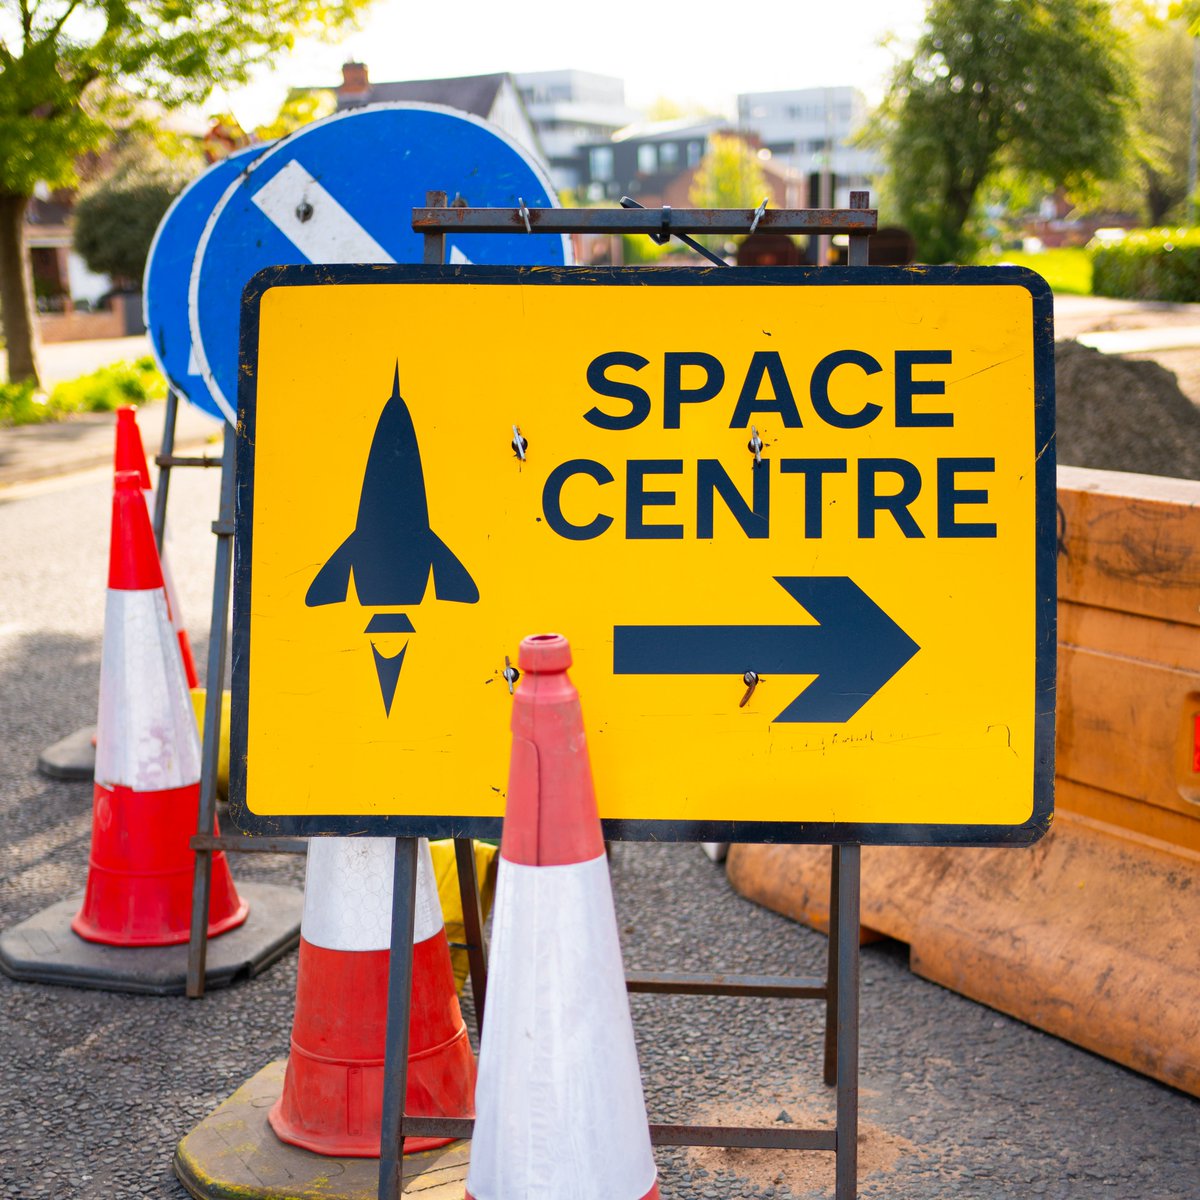 ⚠️ Roadworks ⚠️ The north side of Exploration Drive, connecting to Corporation Road, will be closed from 29 April for 1 week due to essential roadworks. ➡️ If you're visiting @spacecentre during this time please use Abbey Lane and turn into Exploration Drive near ASDA.